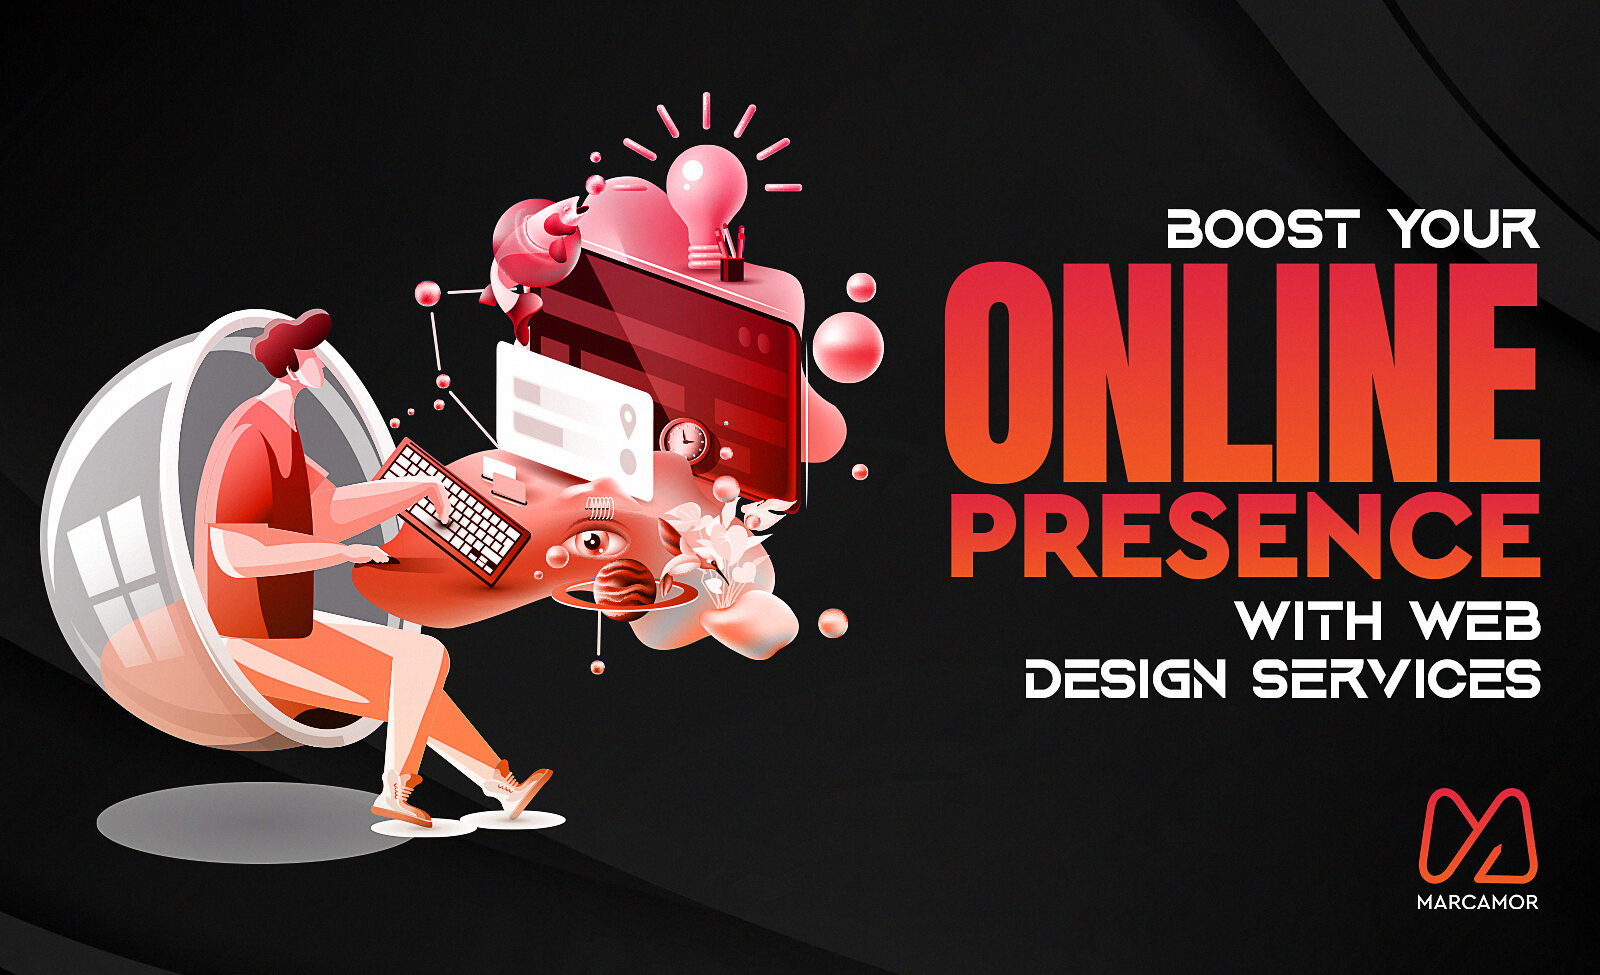 Boost Your Online Presence with Web Design Services